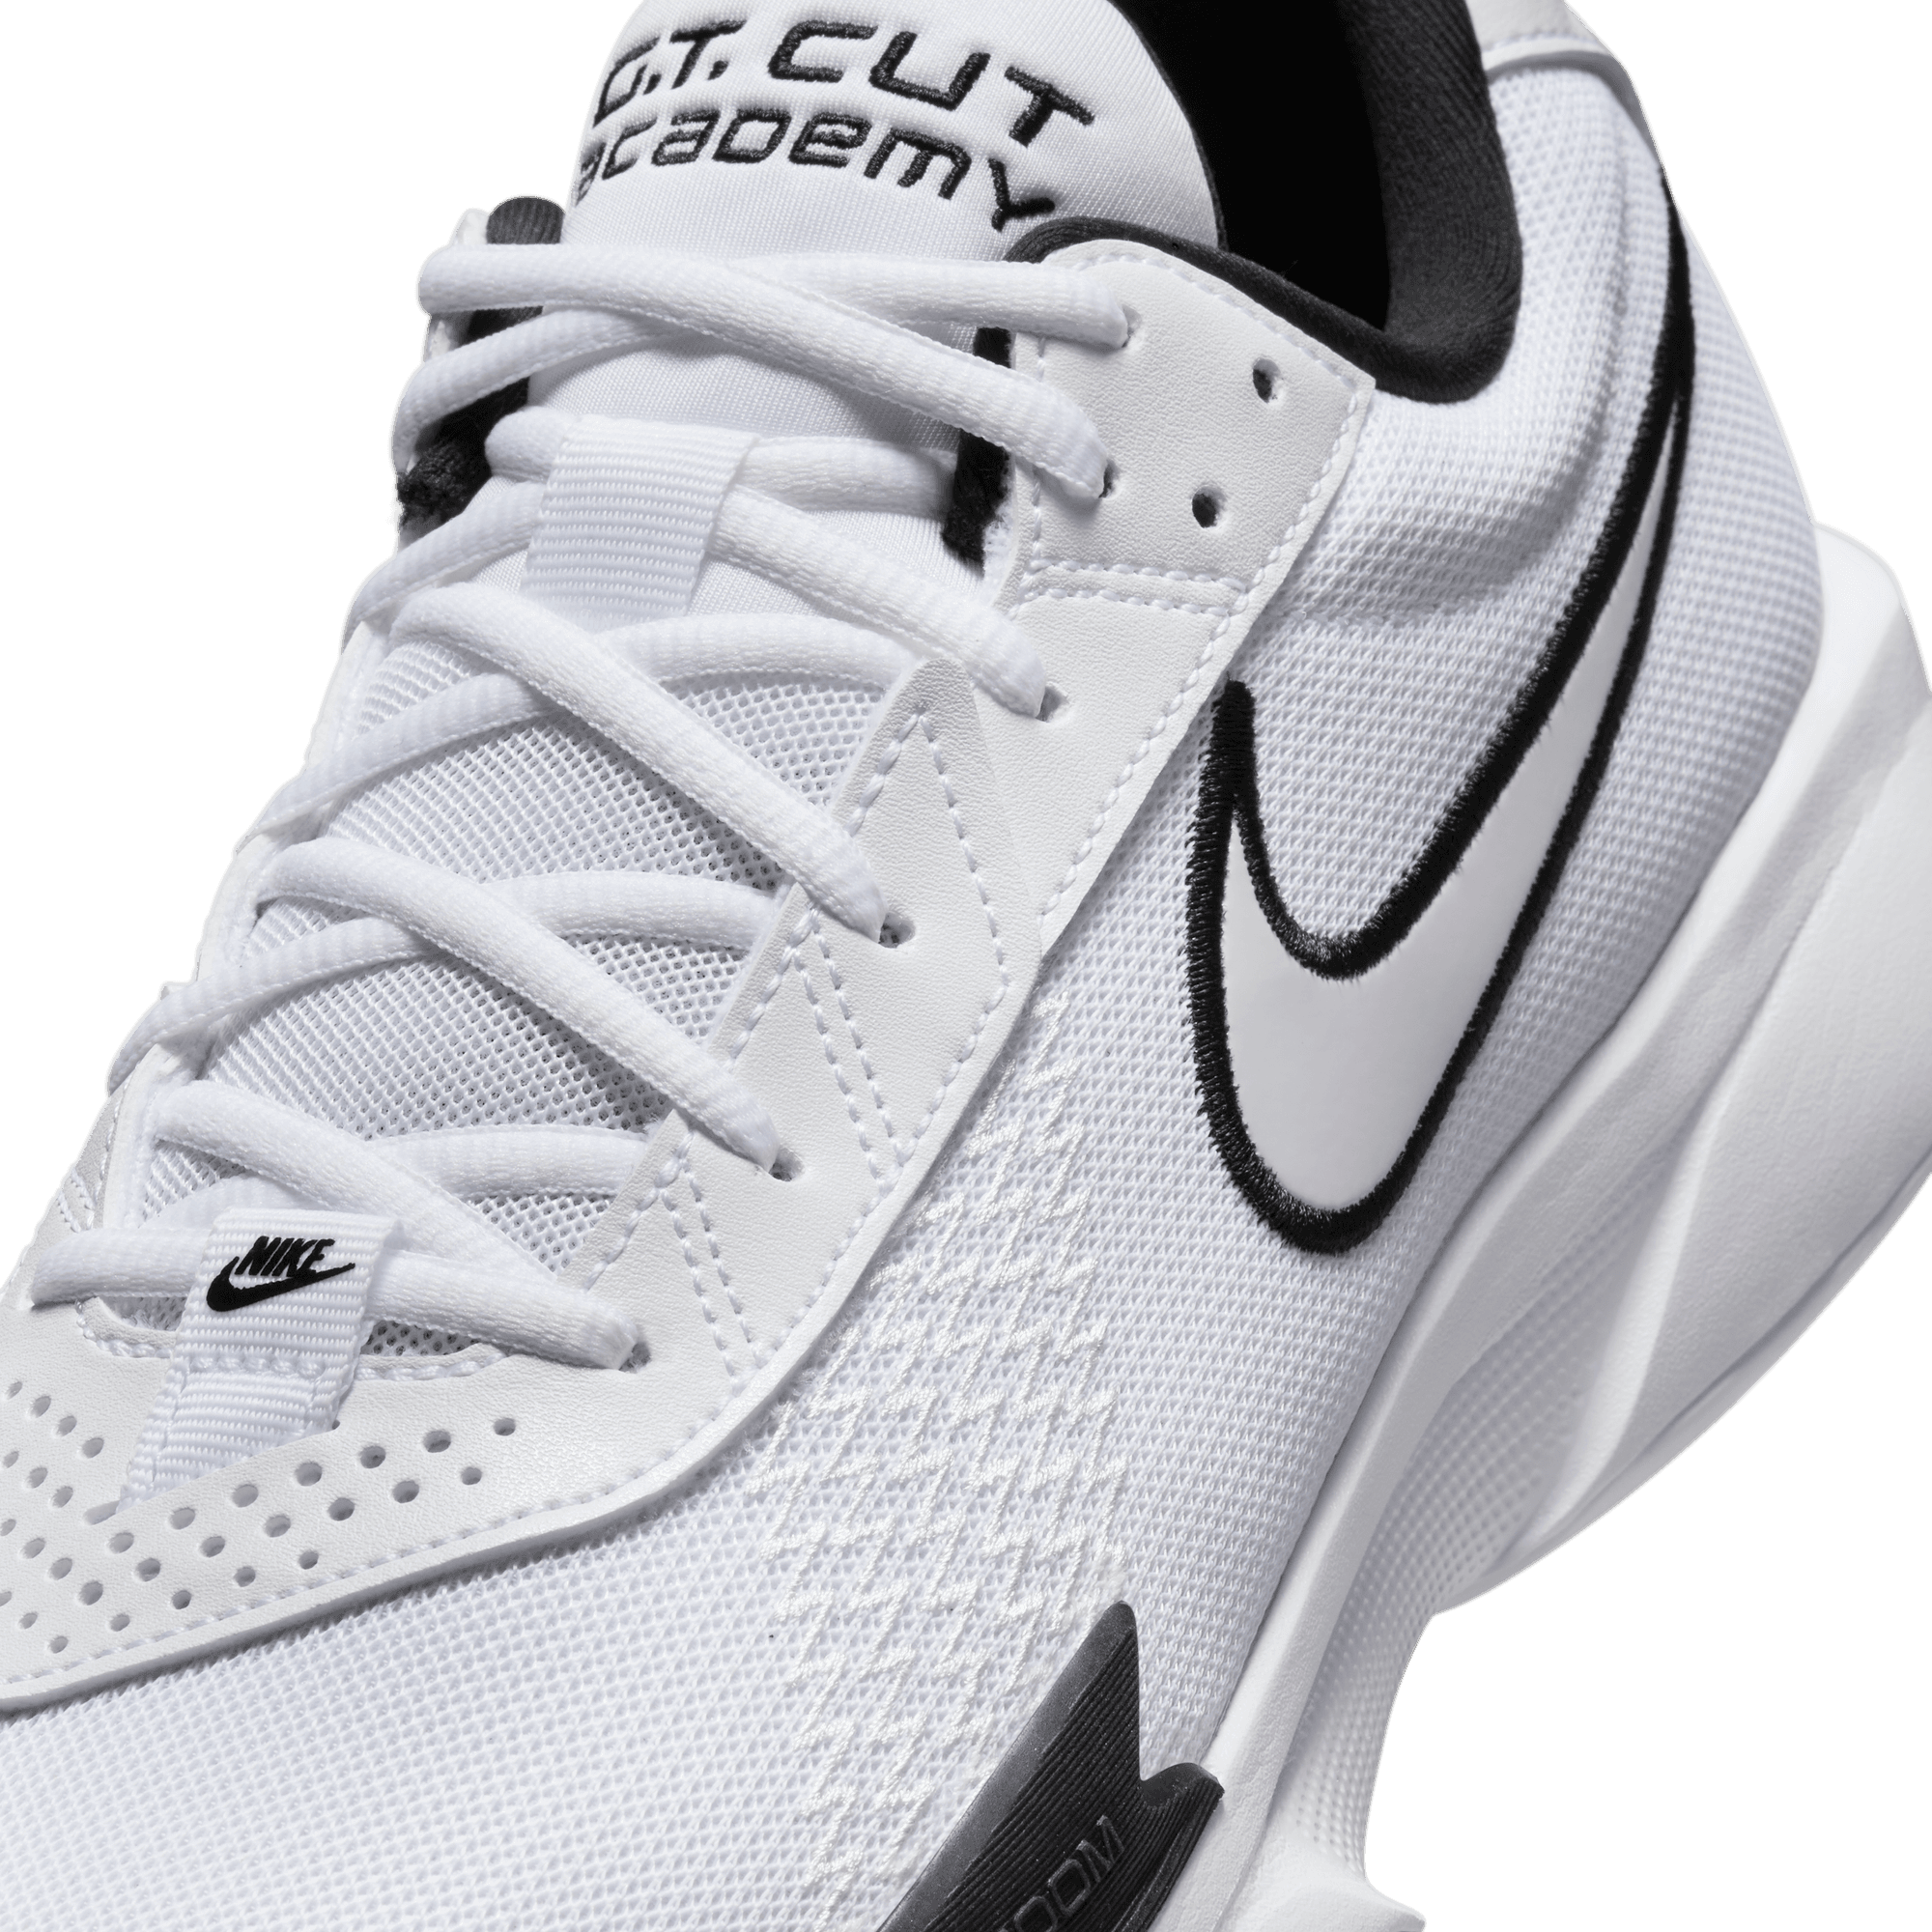 NIKE G.T. CUT ACADEMY EP BASKETBALL SHOES WHITE/BLACK – Park Outlet Ph